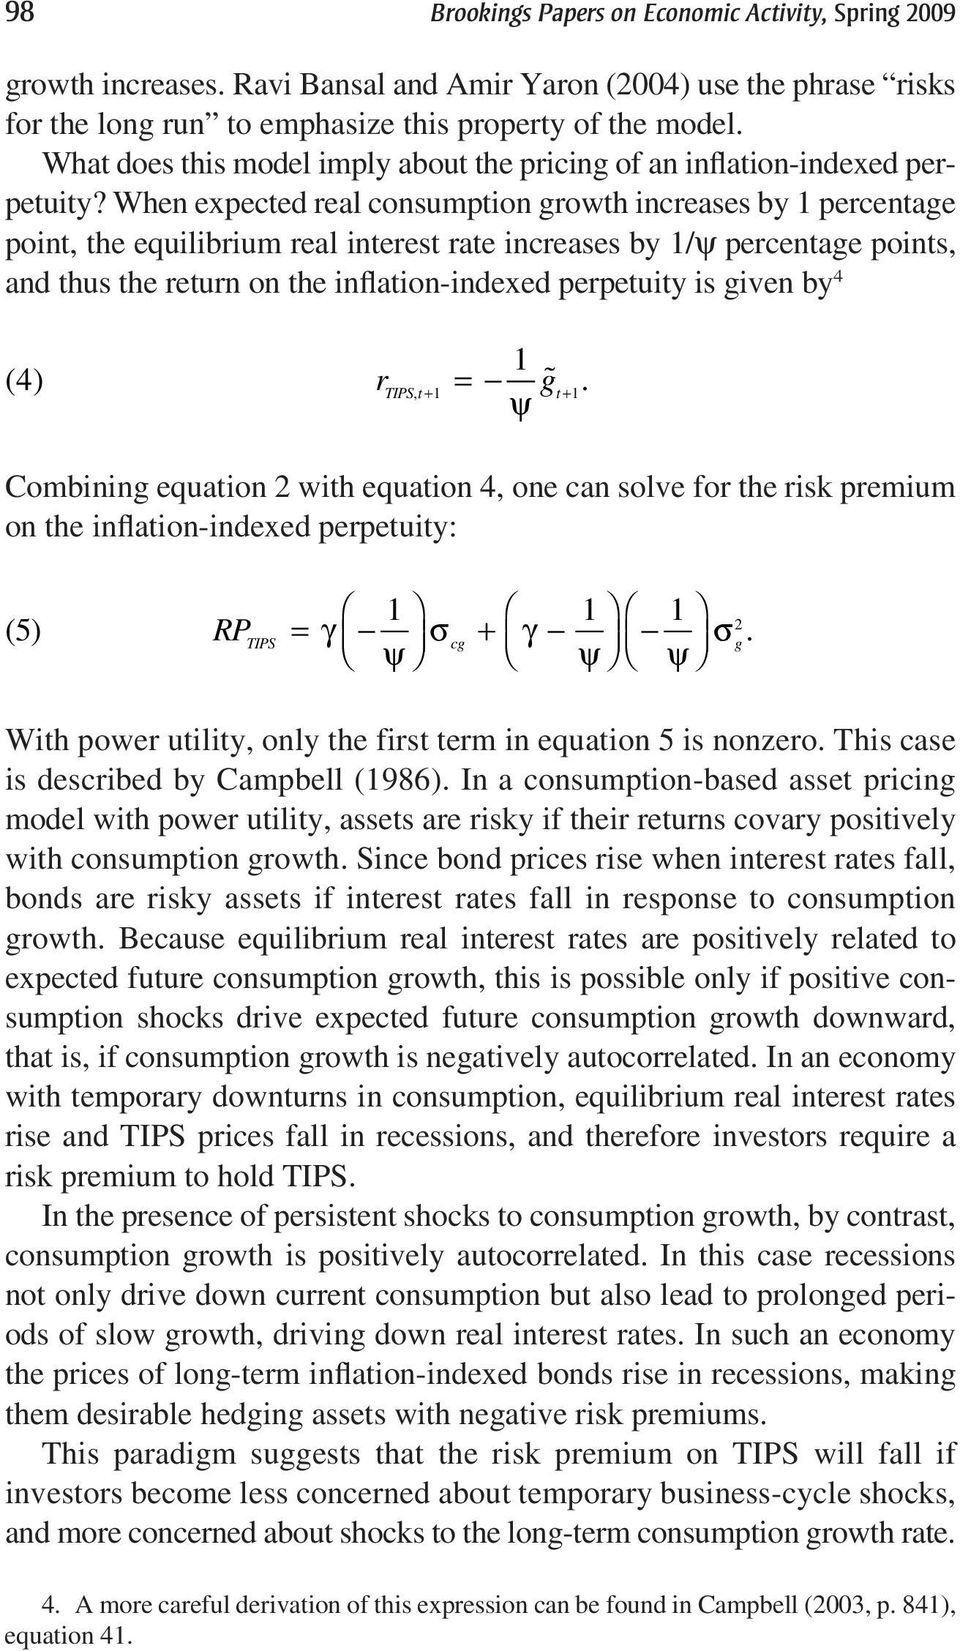 When expected real consumption growth increases by 1 percentage point, the equilibrium real interest rate increases by 1/ψ percentage points, and thus the return on the inflation-indexed perpetuity